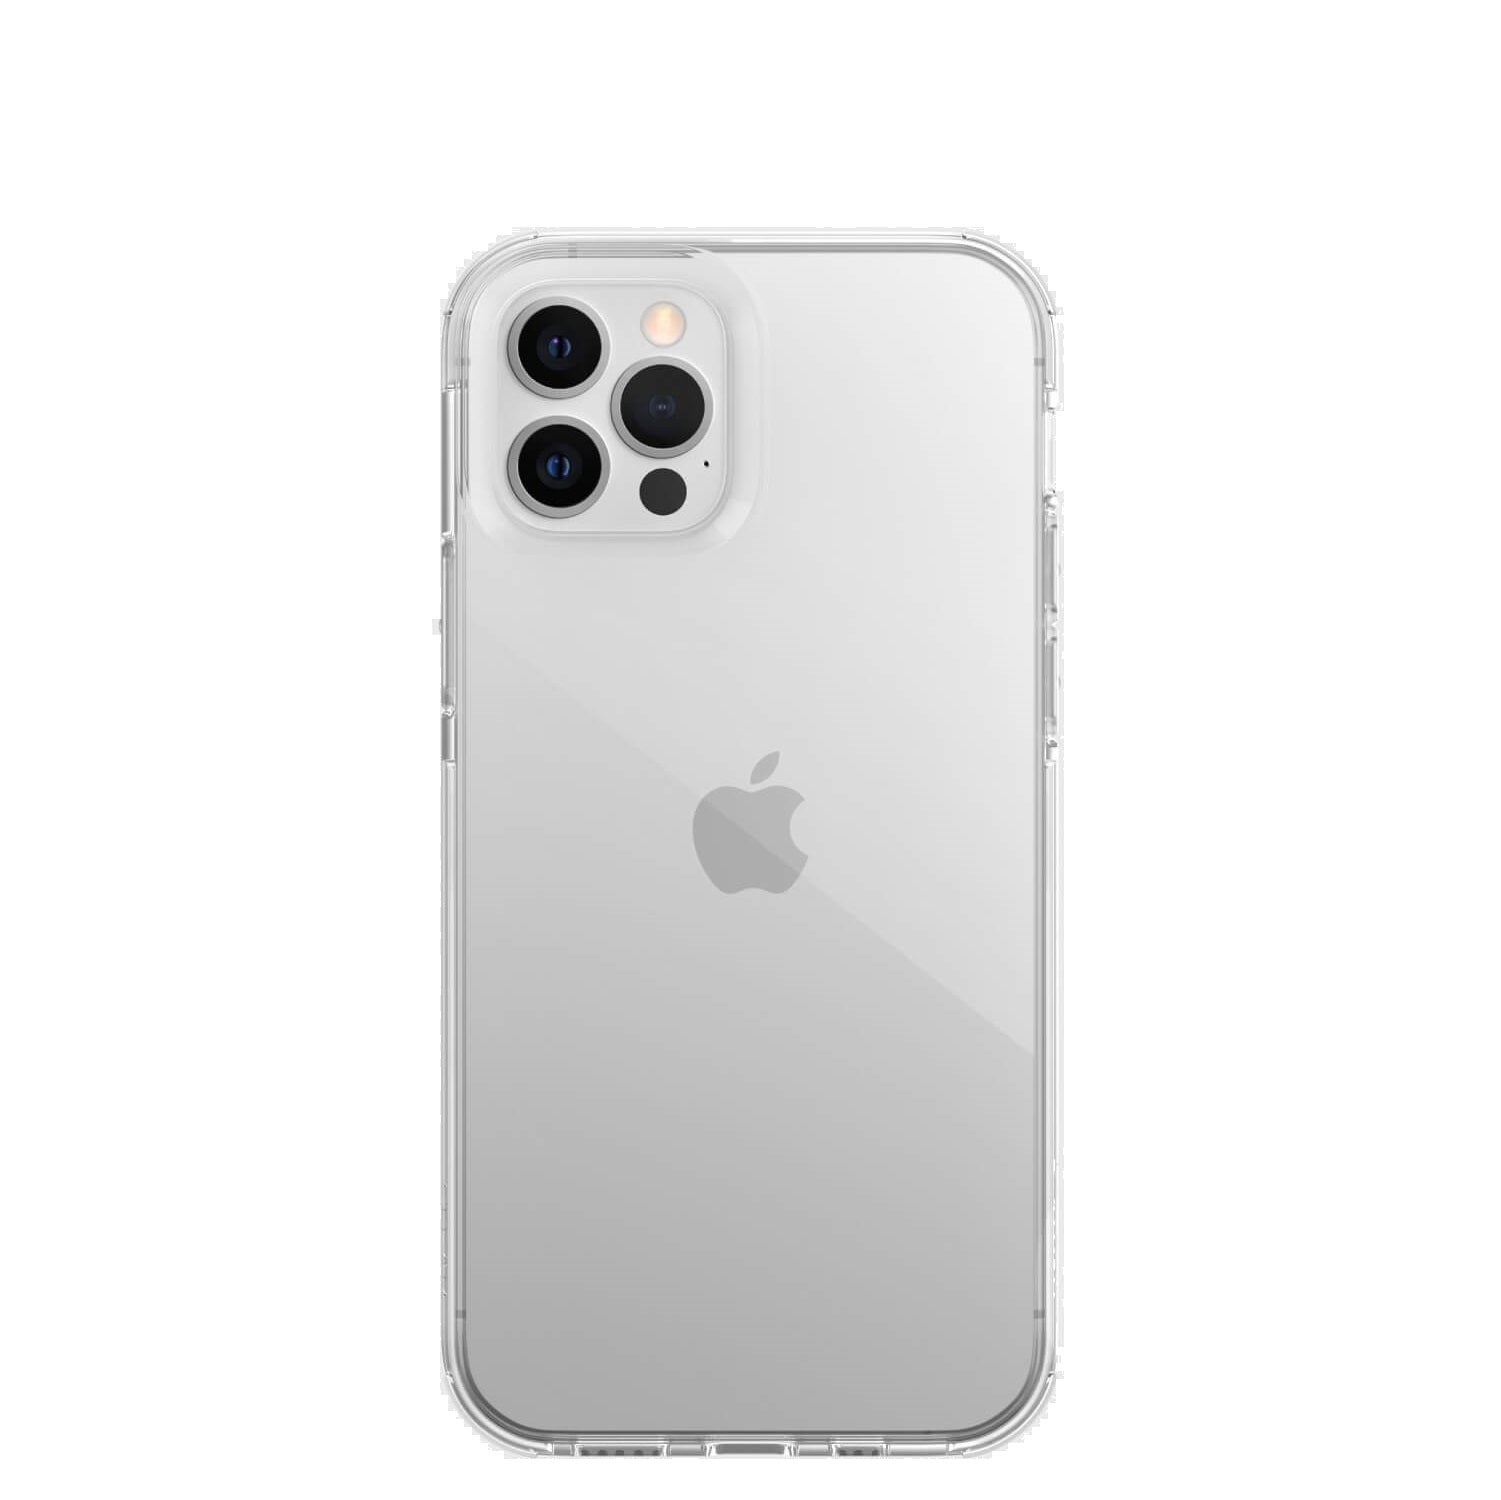 https://caserace.net/products/x-doria-defense-clear-back-cover-for-iphone-iphone-12-12-pro-6-1-clear